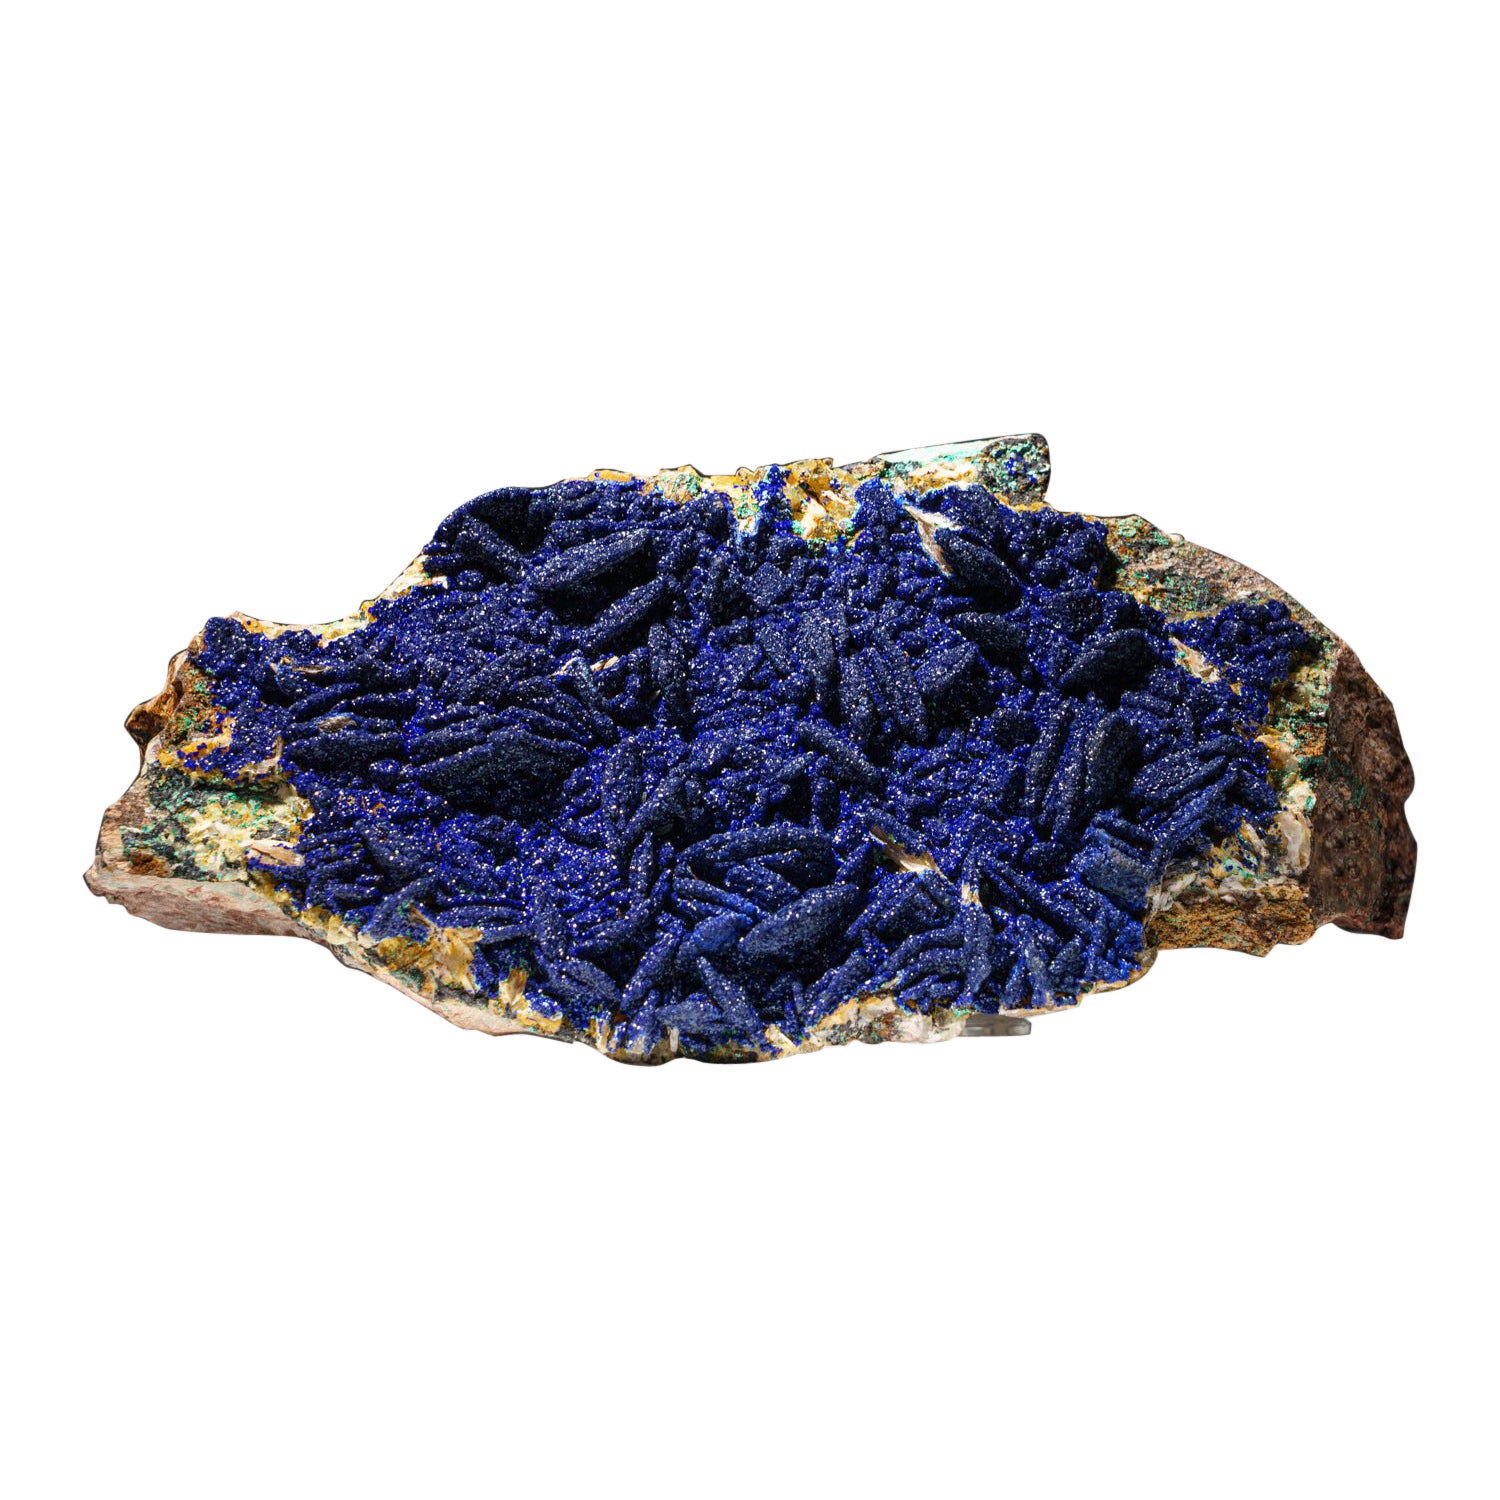 Azurite from Ahouli Mines, Aouli, Zeida-Aouli-Mibladen belt, Midelt Province, Mo For Sale